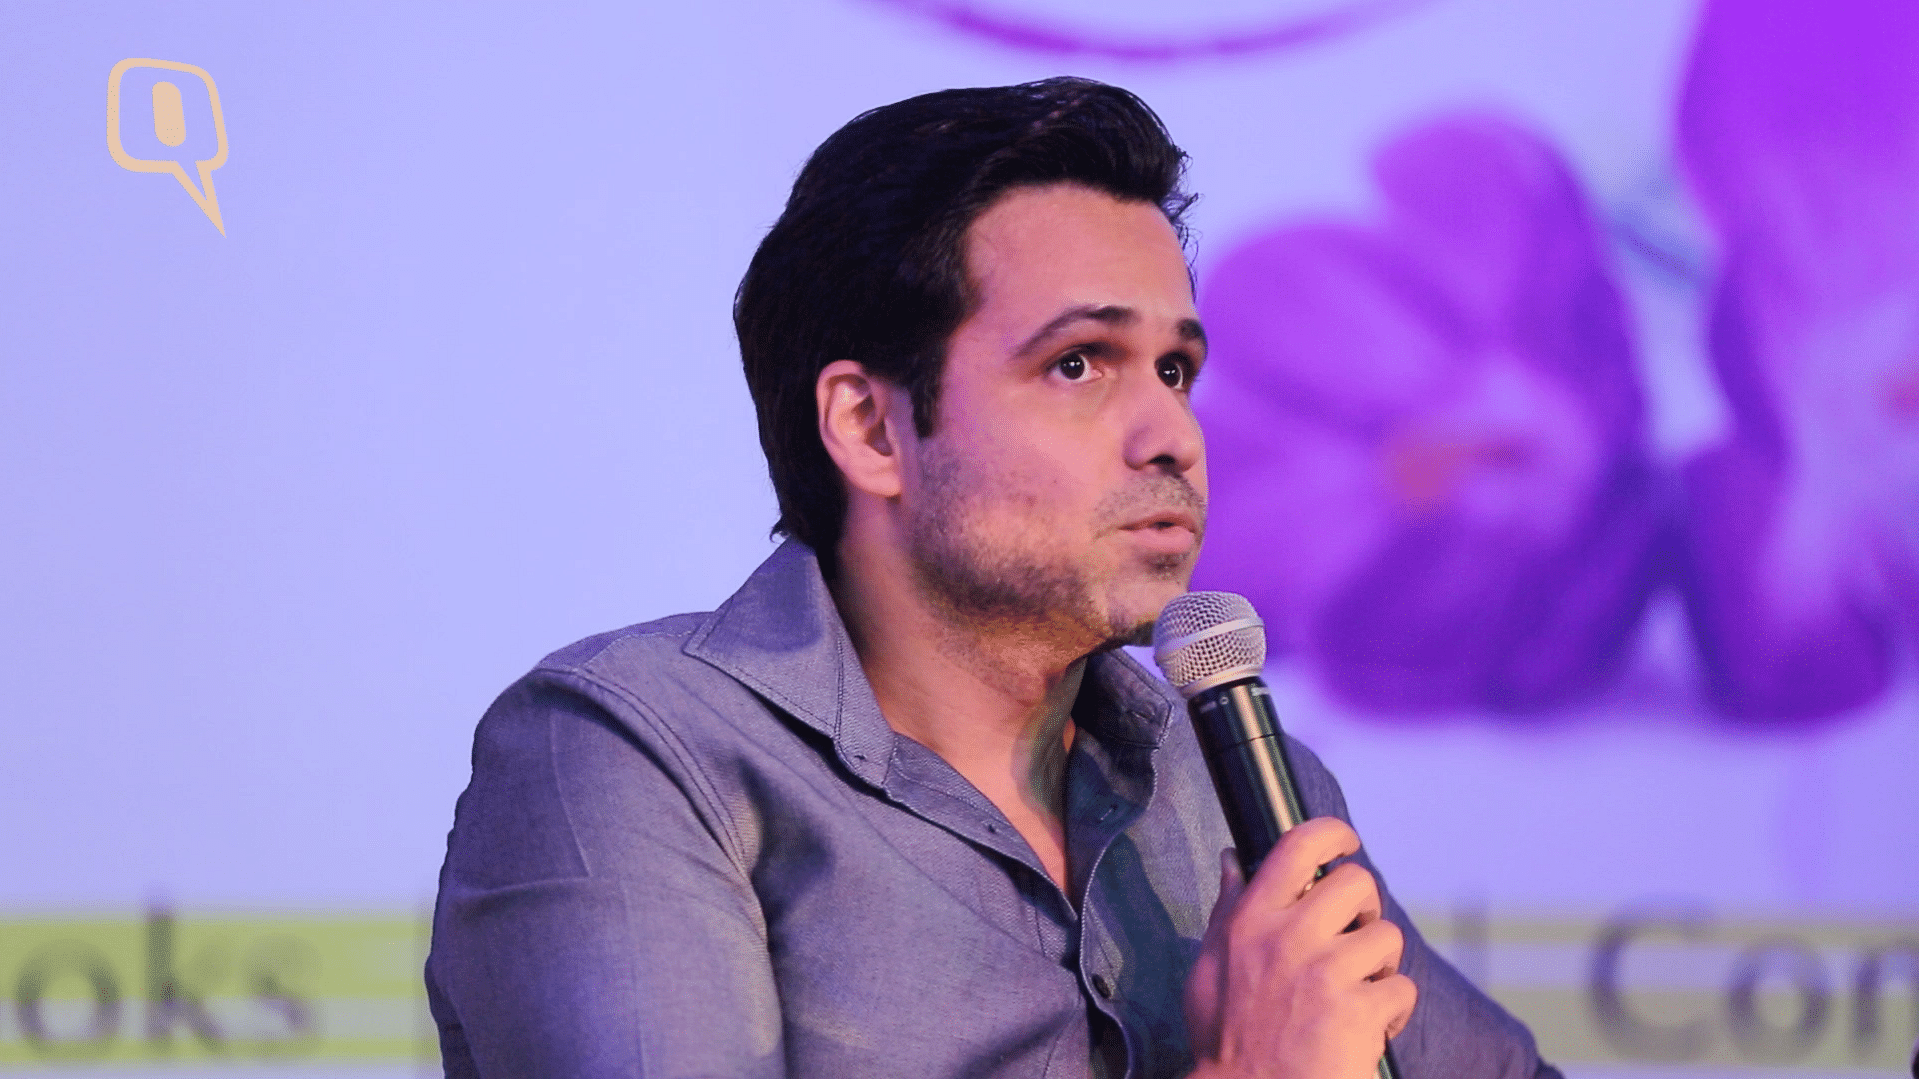 Emraan Hashmi talks about his son who was diagnosed with cancer at the age of 3. (Photo Courtesy: The Quint)